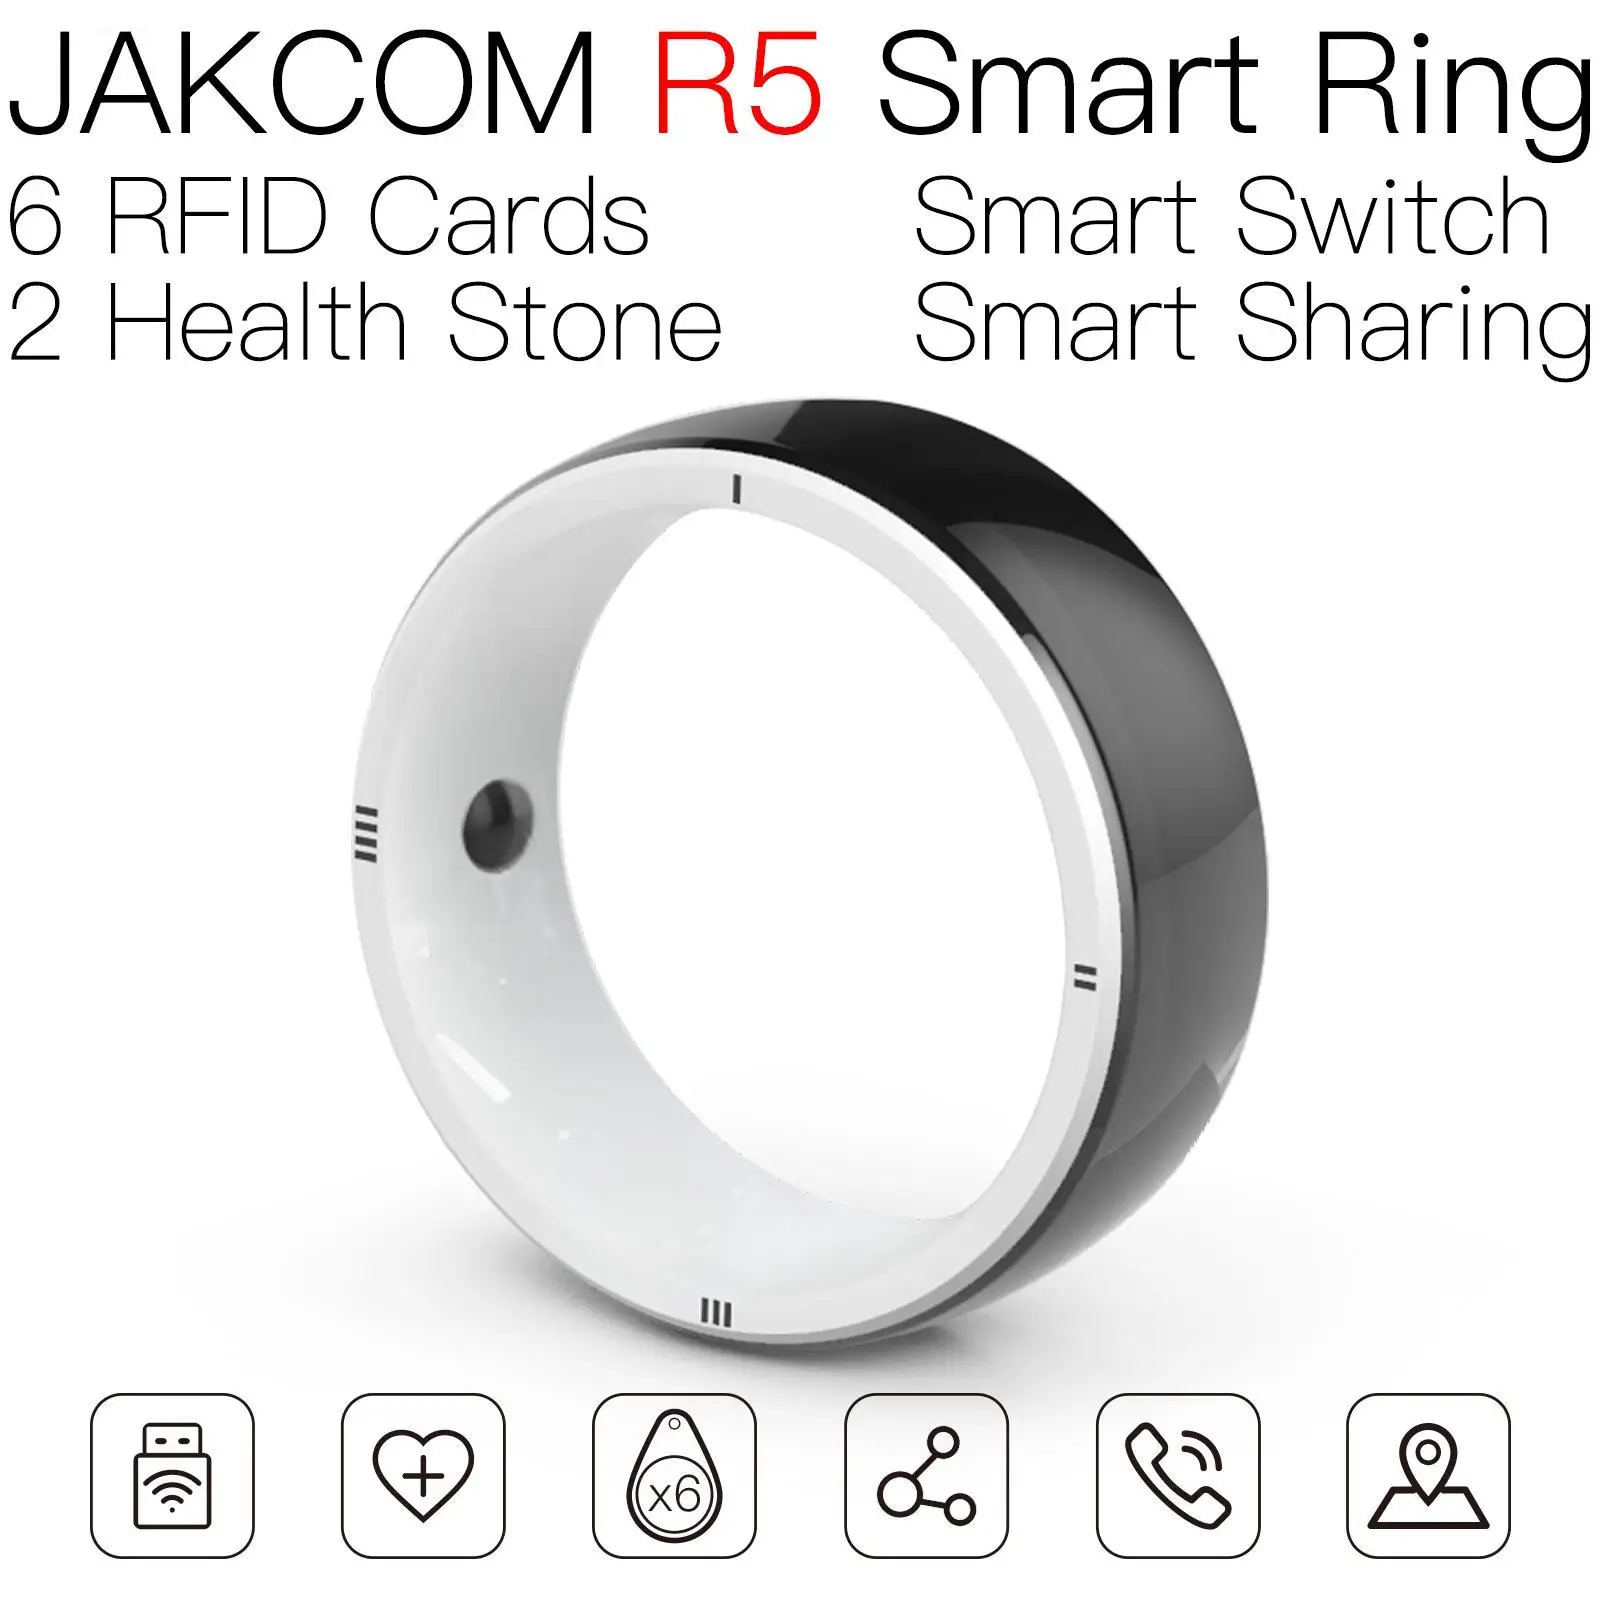 

JAKCOM R5 Smart Ring Super value than my tag nfc rupees 2 offers animal rfid microchip usb c uhf sma cable 5ghz 5m r3